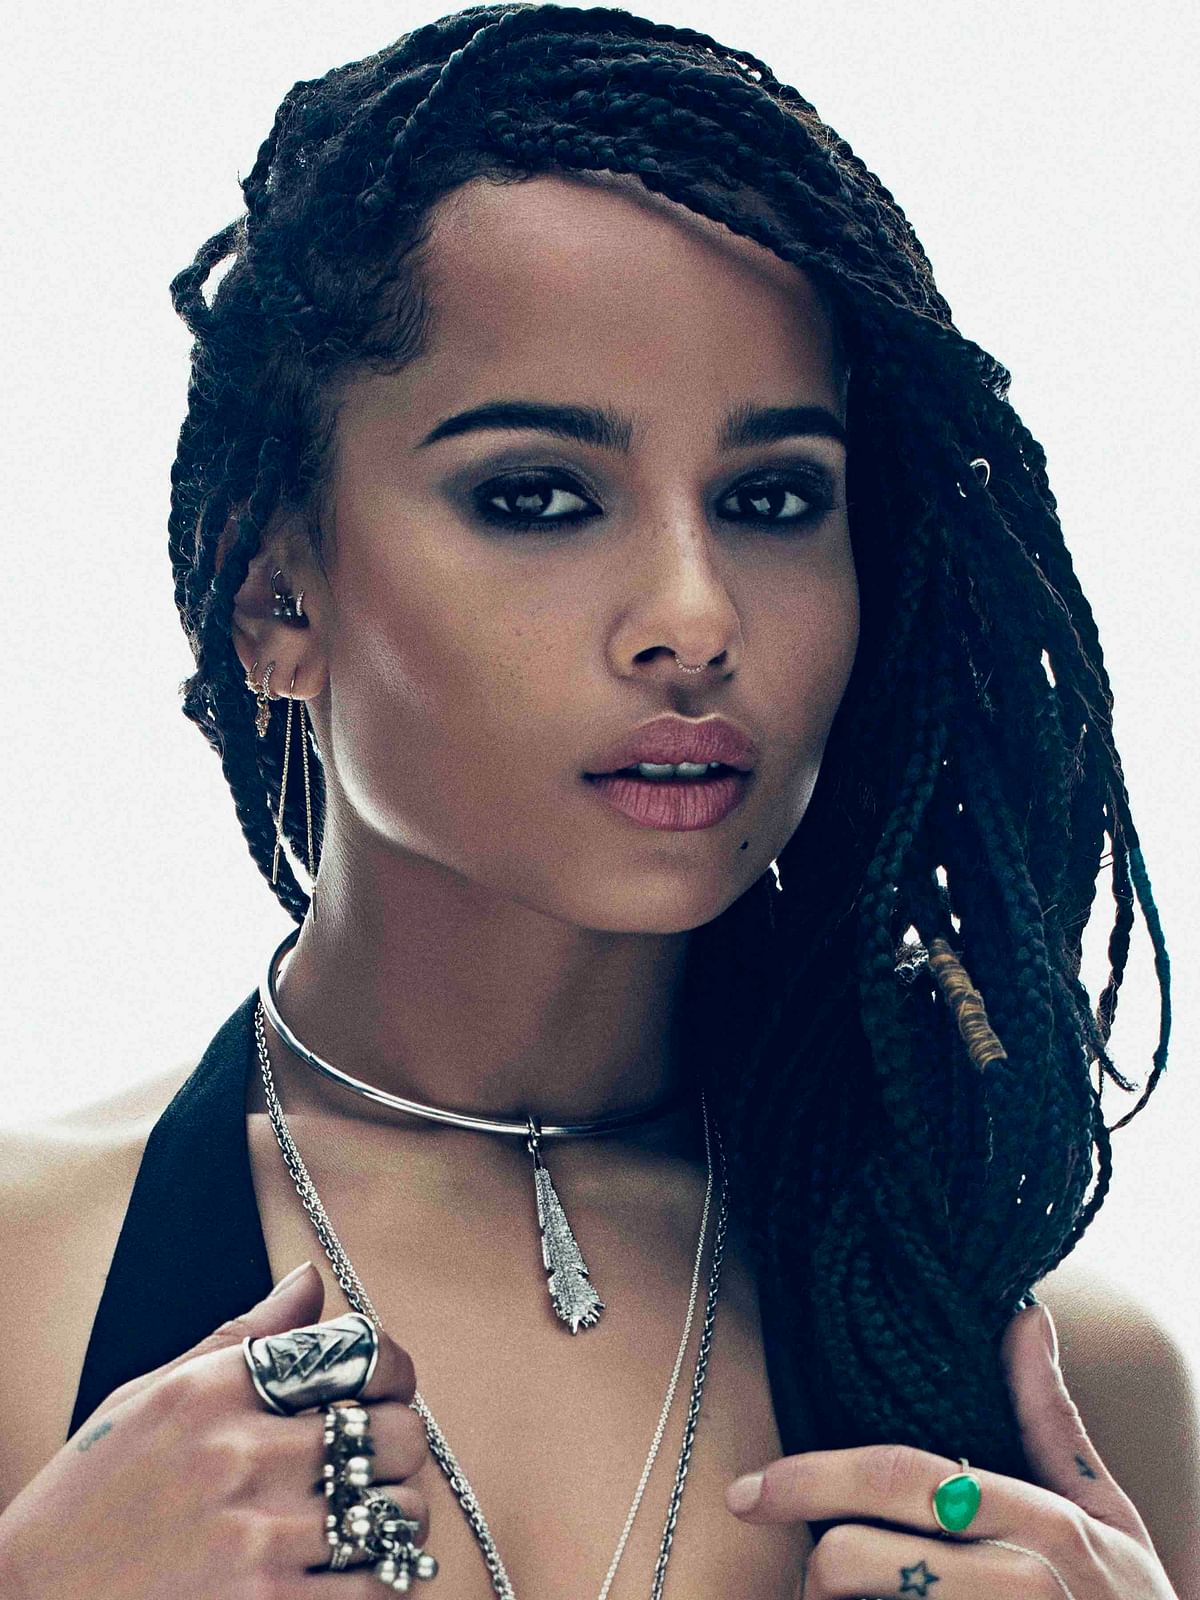 Zoe Kravitz once tried ditching her surname